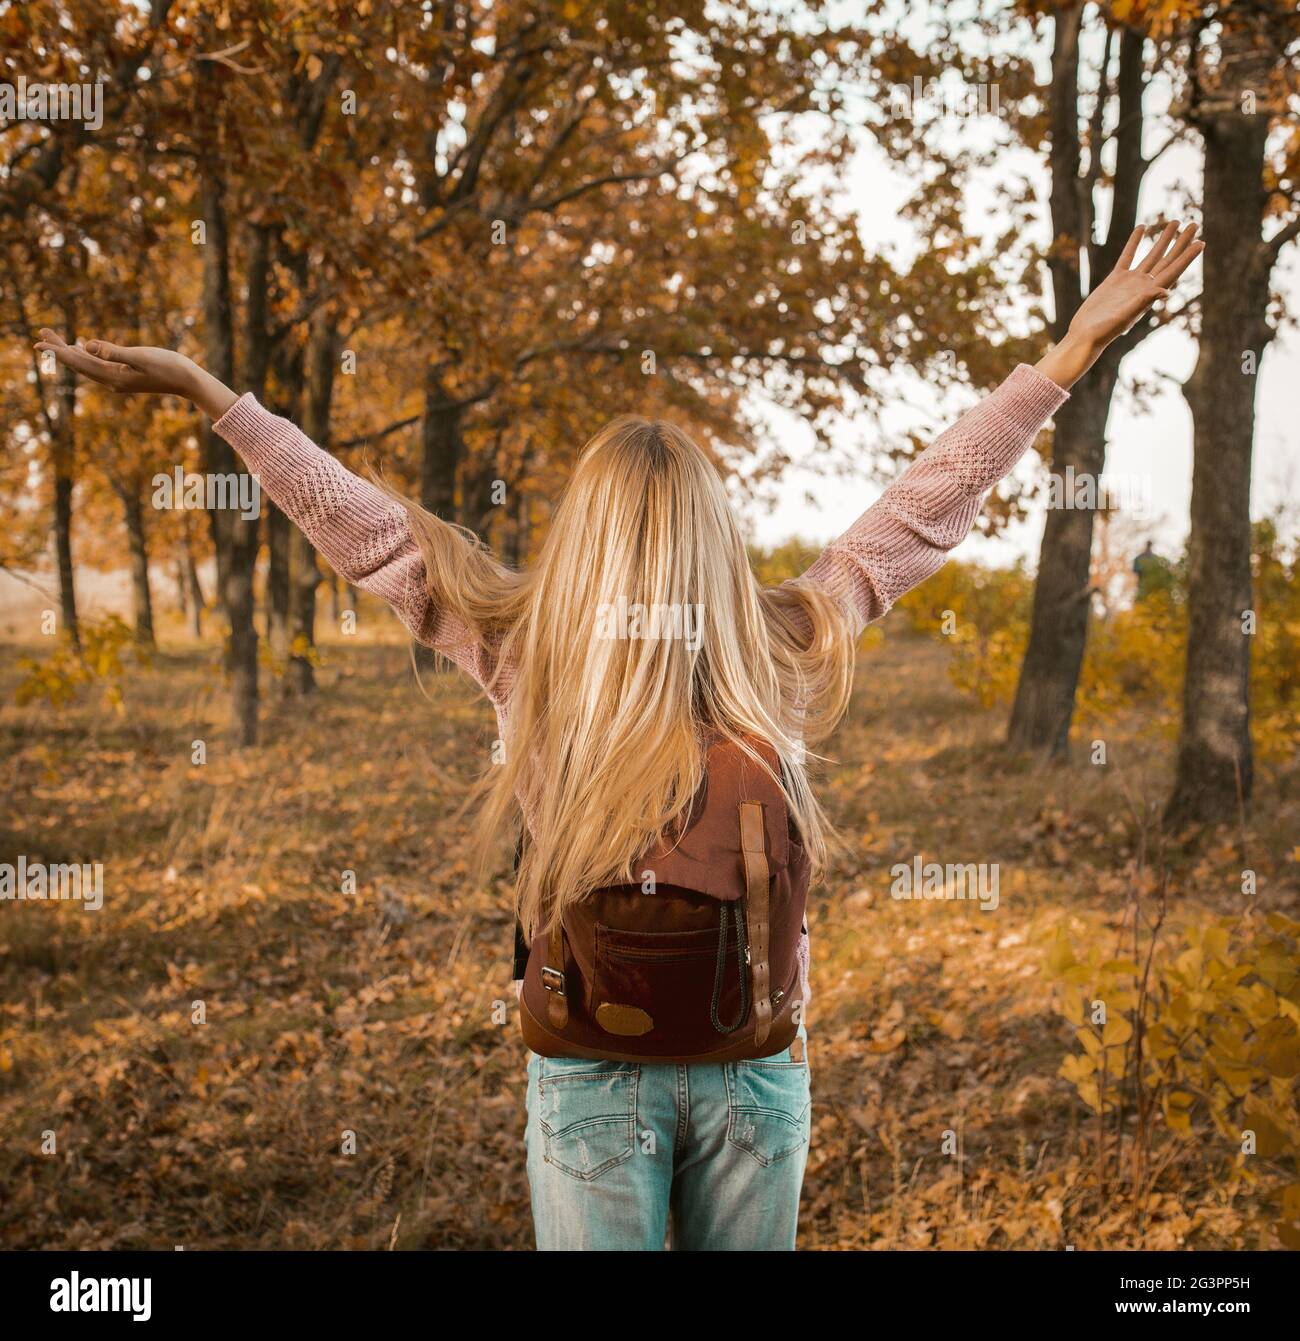 Rear View Of Happy Blonde With Arms Raised In Autumn Forest Stock Photo